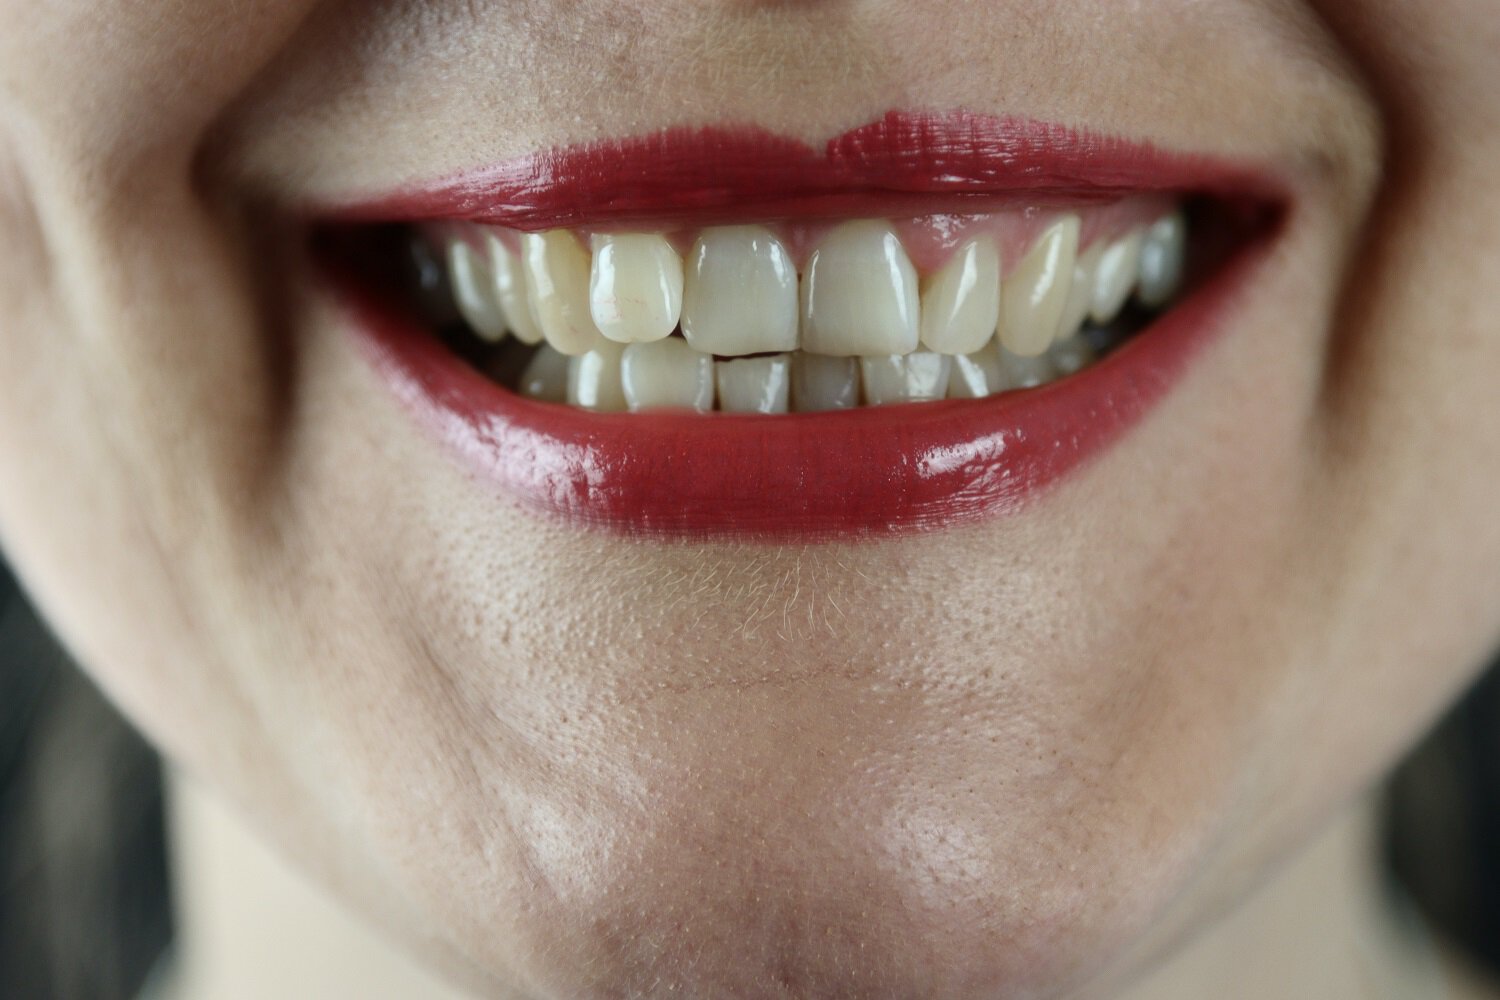 Sherman Oaks bruxism patient model with crooked teeth with red lipstick